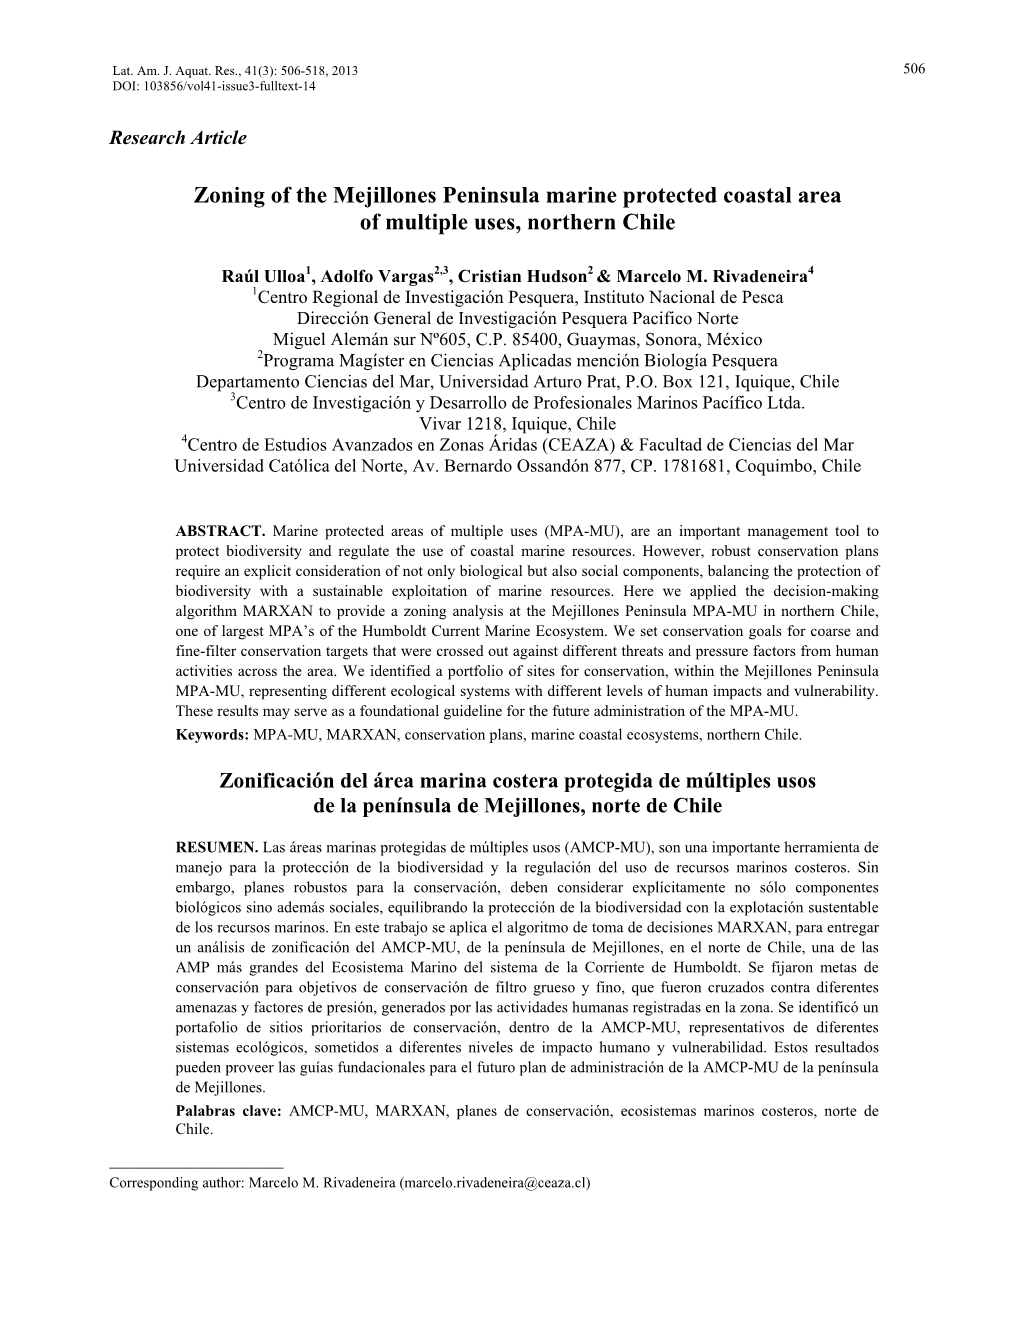 Zoning of the Mejillones Peninsula Marine Protected Coastal Area of Multiple Uses, Northern Chile